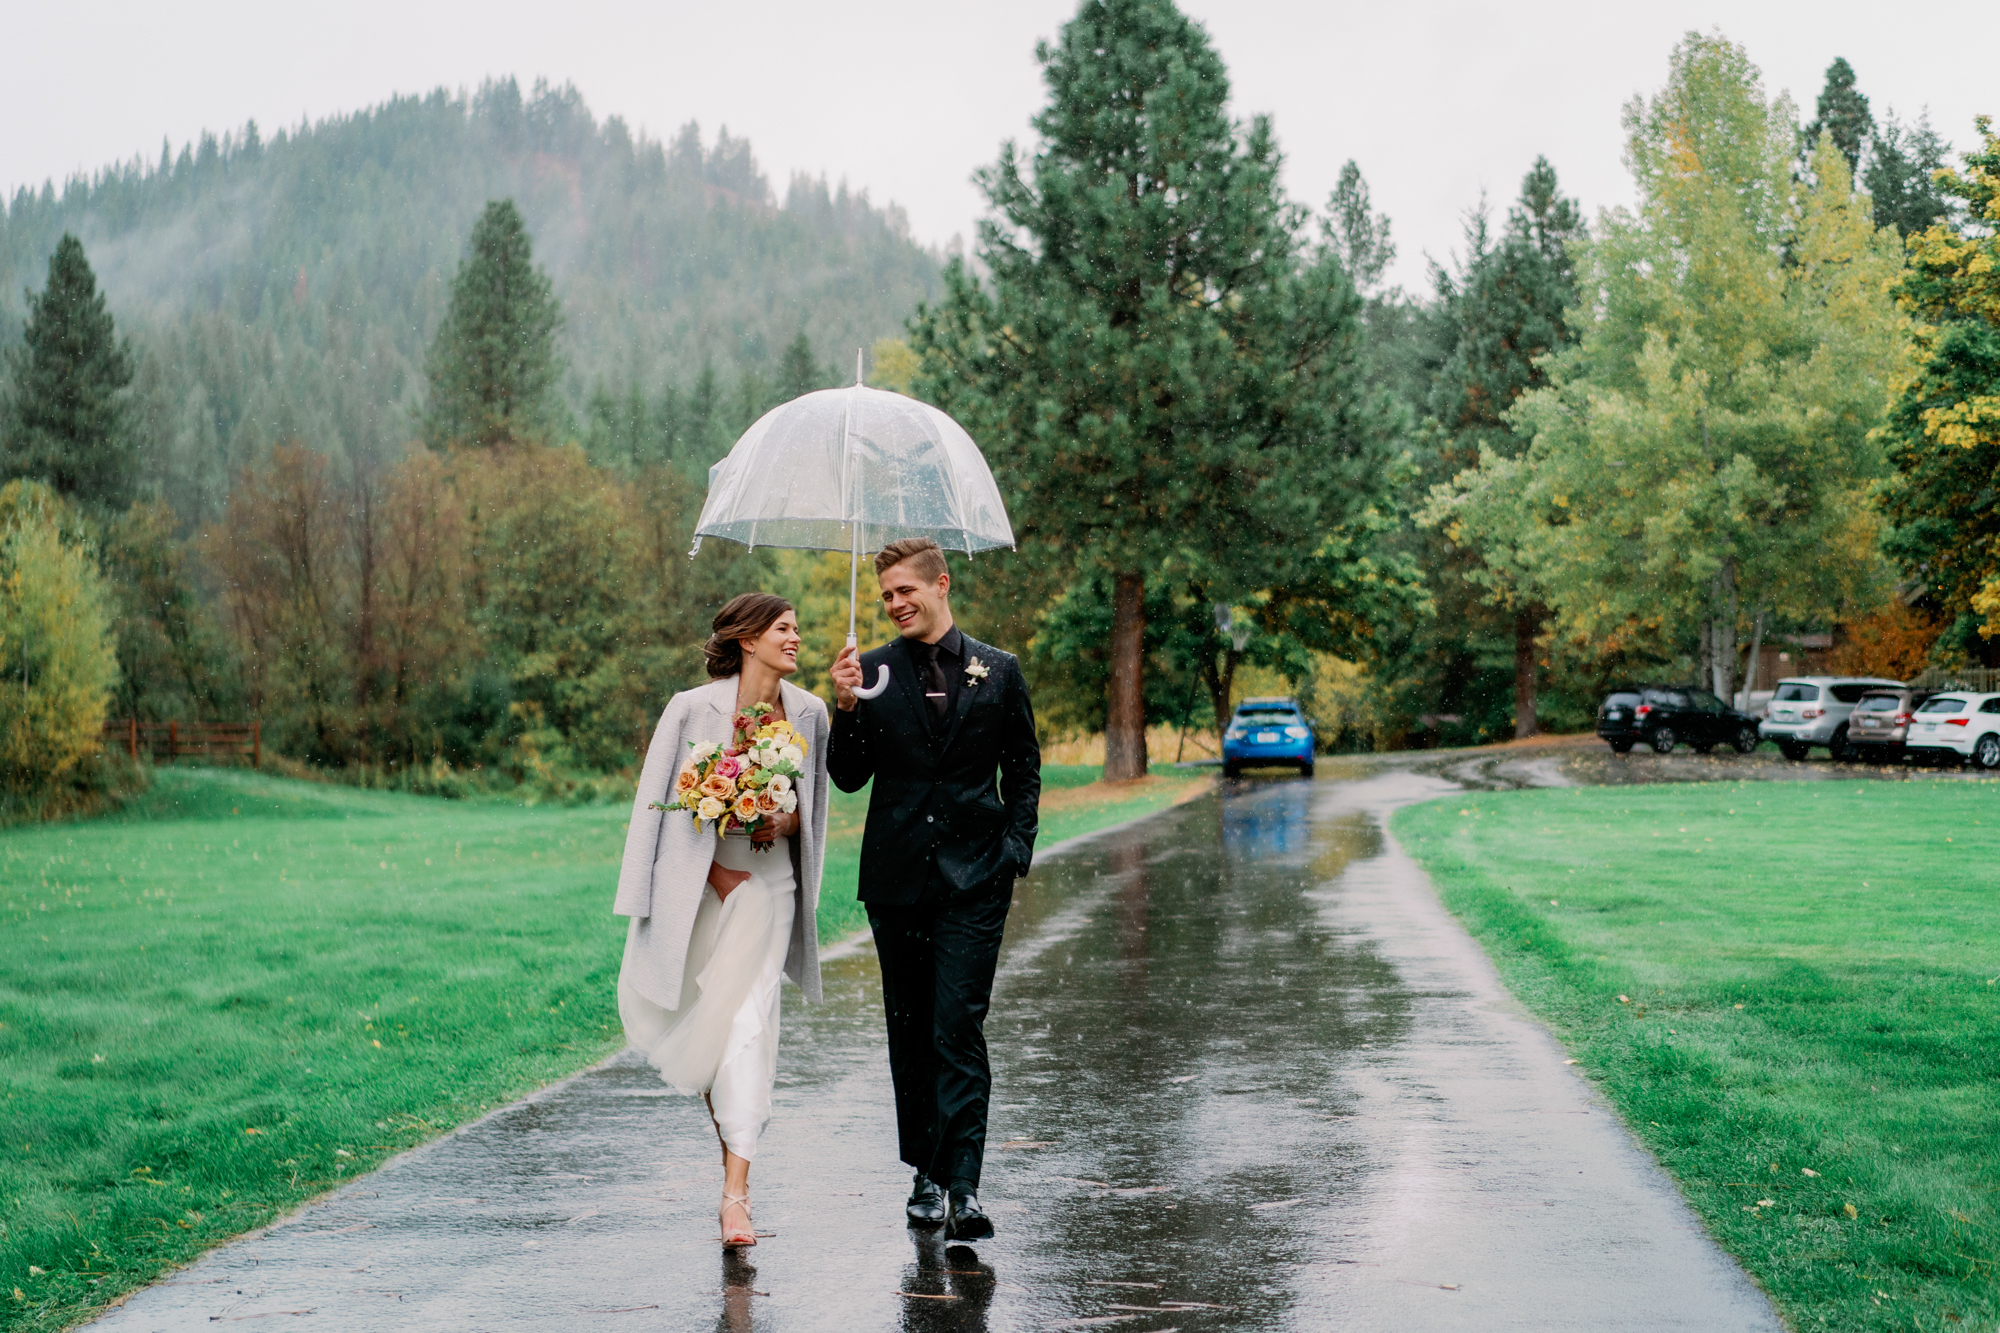 Mountain Springs Lodge weddings: Fletcher and Veronica walk to their ceremony